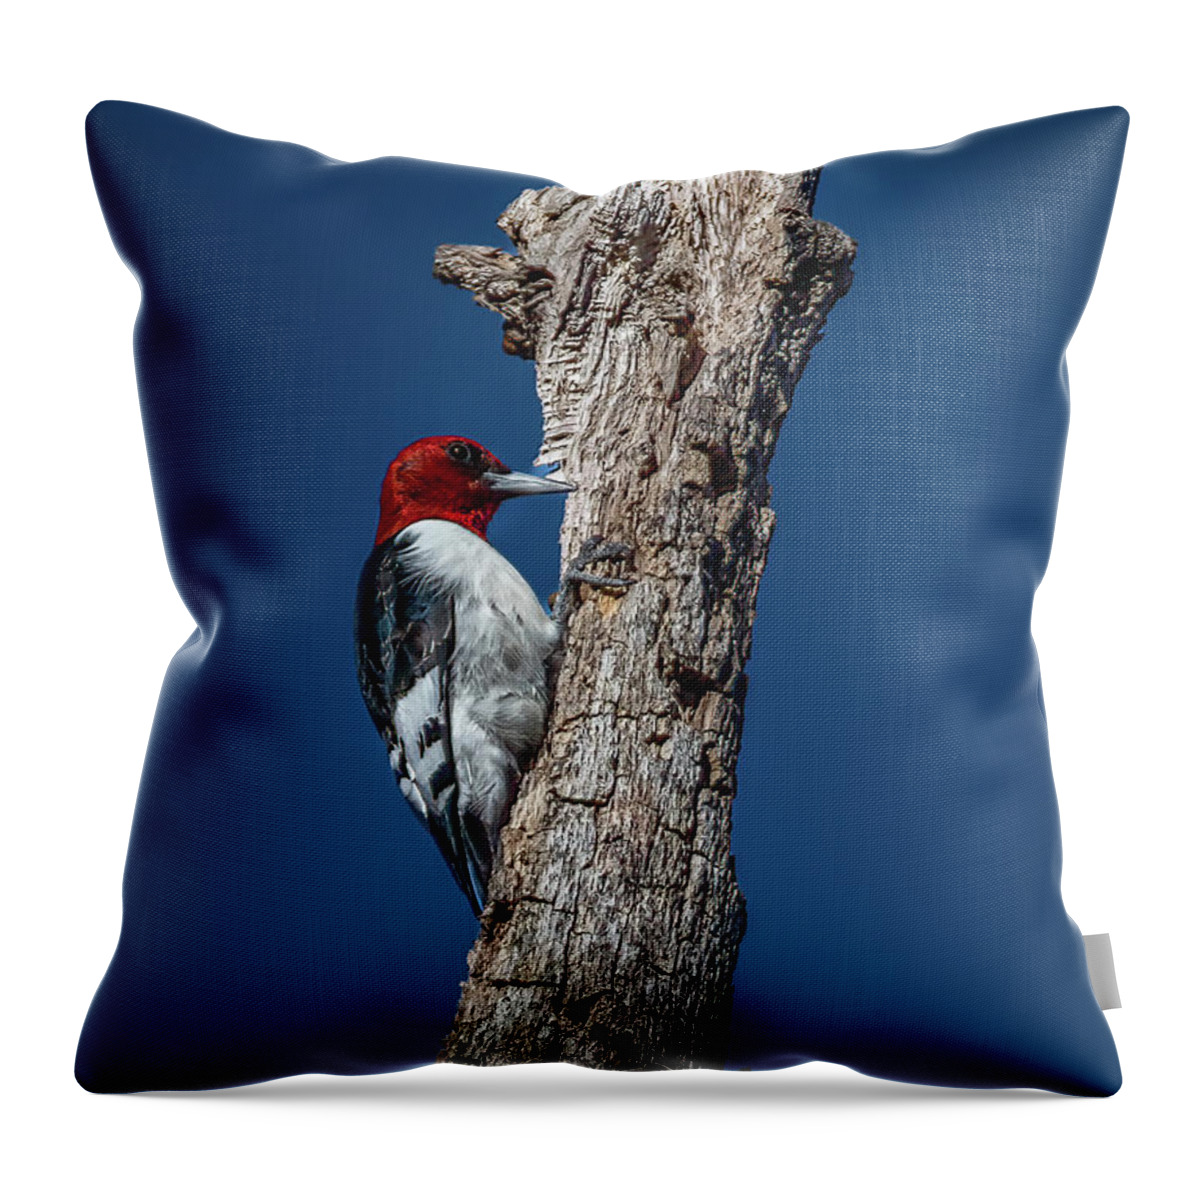 Animal Throw Pillow featuring the photograph Red Headed Woodpecker by Brian Shoemaker